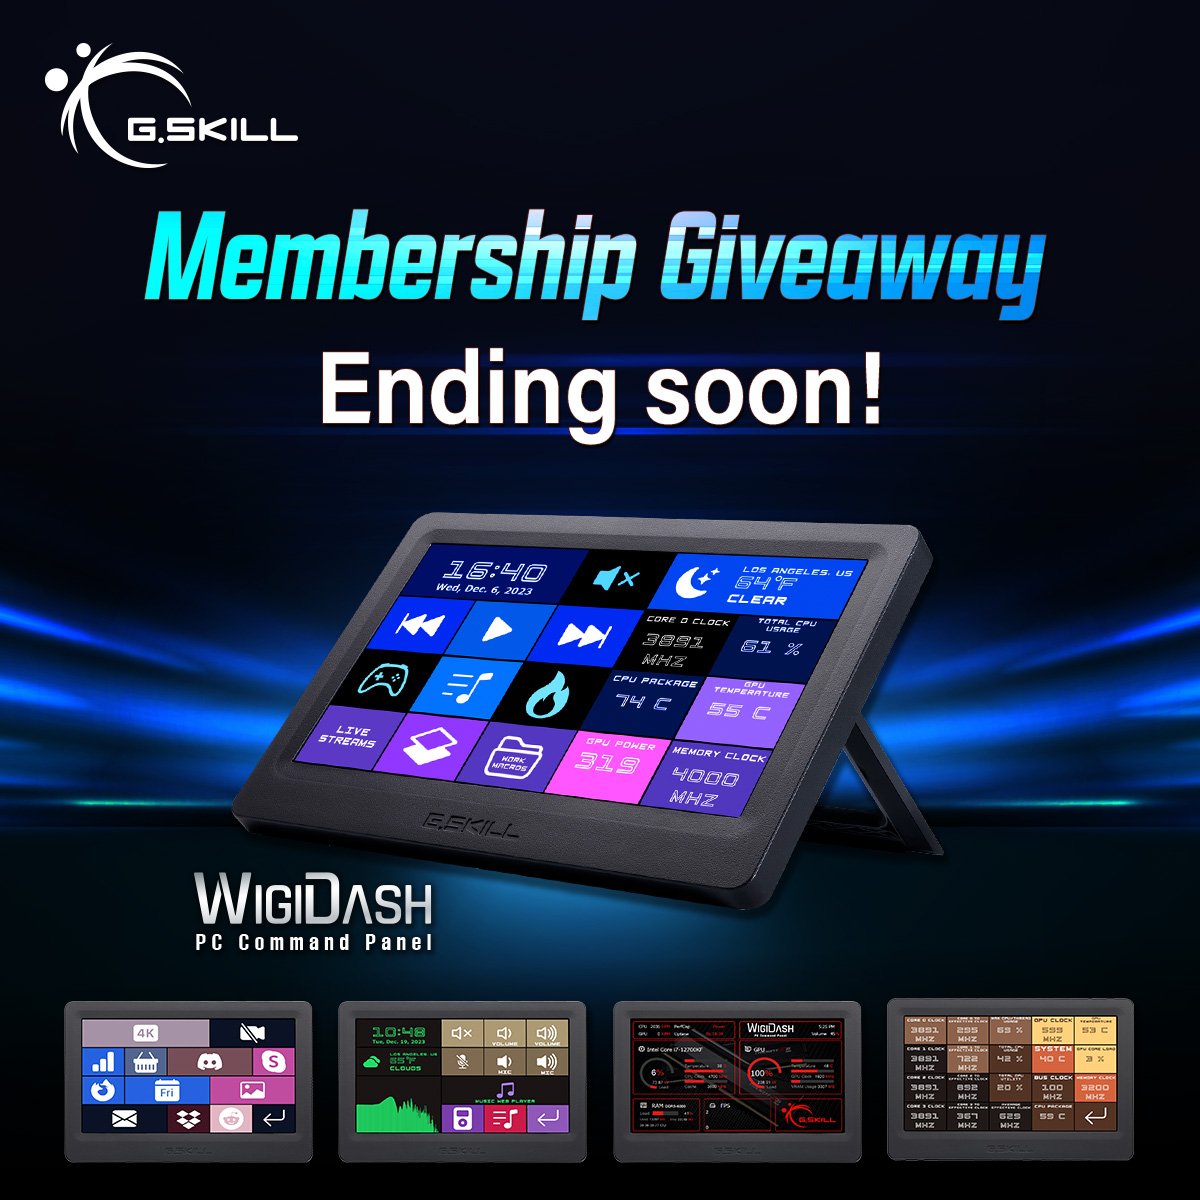 One more week till our WigiDash membership giveaway ends!😎 We're rewarding THREE G.SKILL members with a brand new WigiDash PC Command Panel. Just sign up to be a member and enter on our event page: gskill.com/event?id=17096…